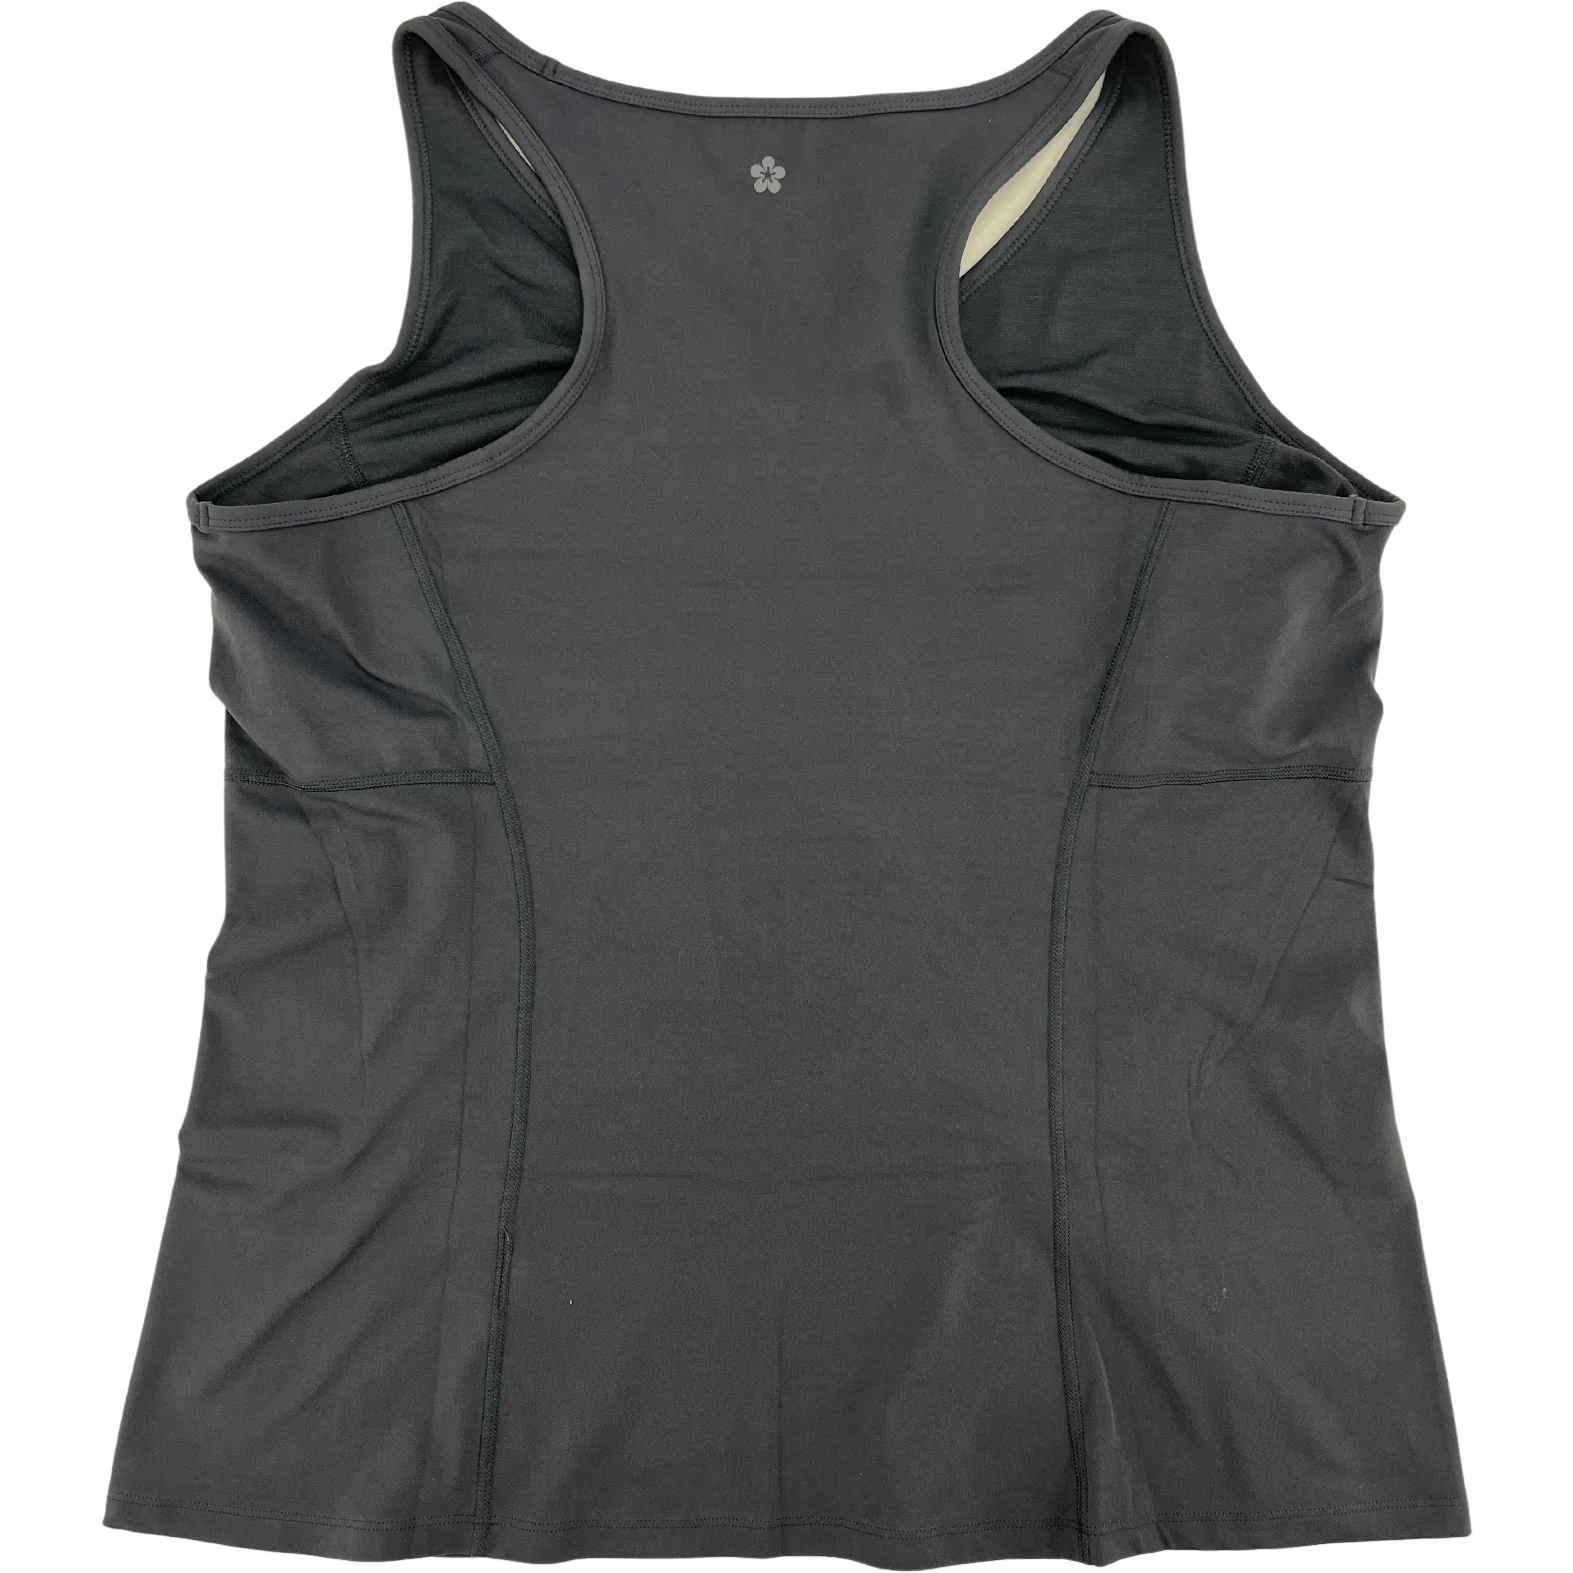 Adult* Vogo Athletics, Black and Grey Workout Tank Top - Size